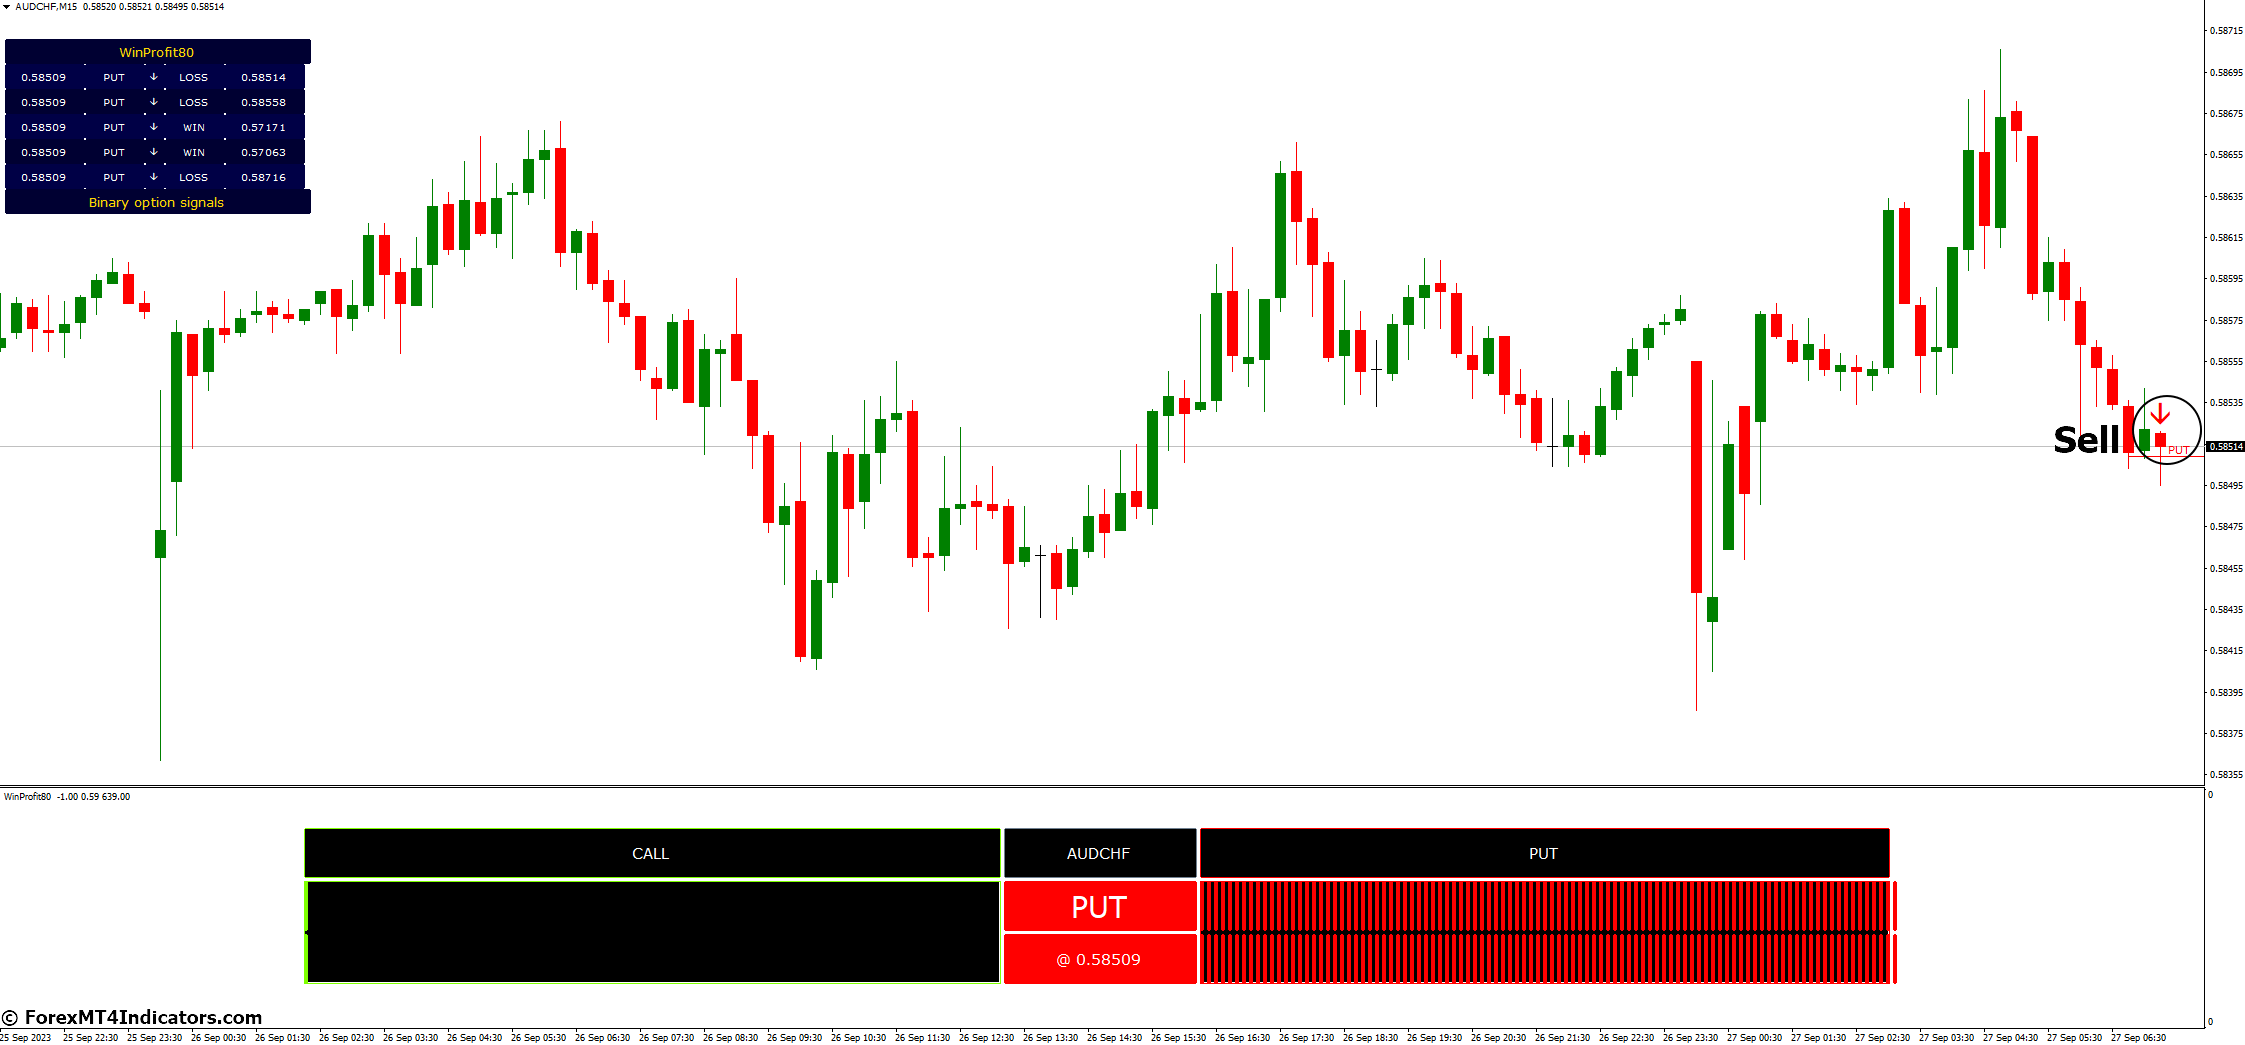 How to Trade with Winprofit80 V2 MT4 Indicator - Sell Entry